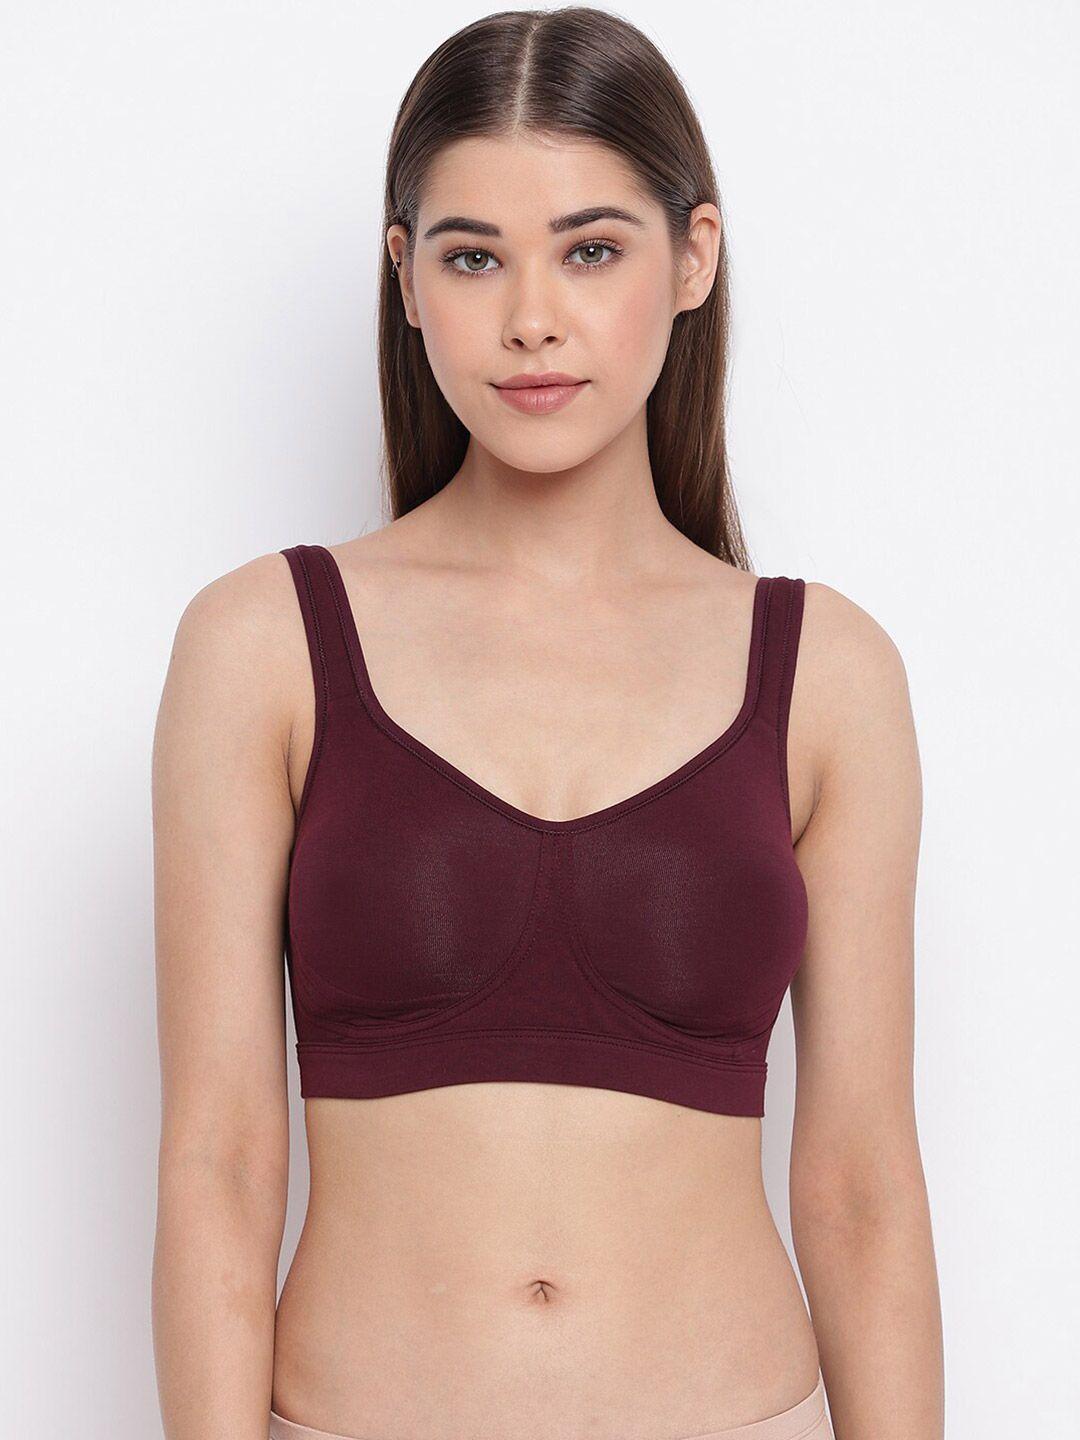 enamor-burgundy-stretch-cotton-everyday-bra---full-coverage-non-padded-non-wired